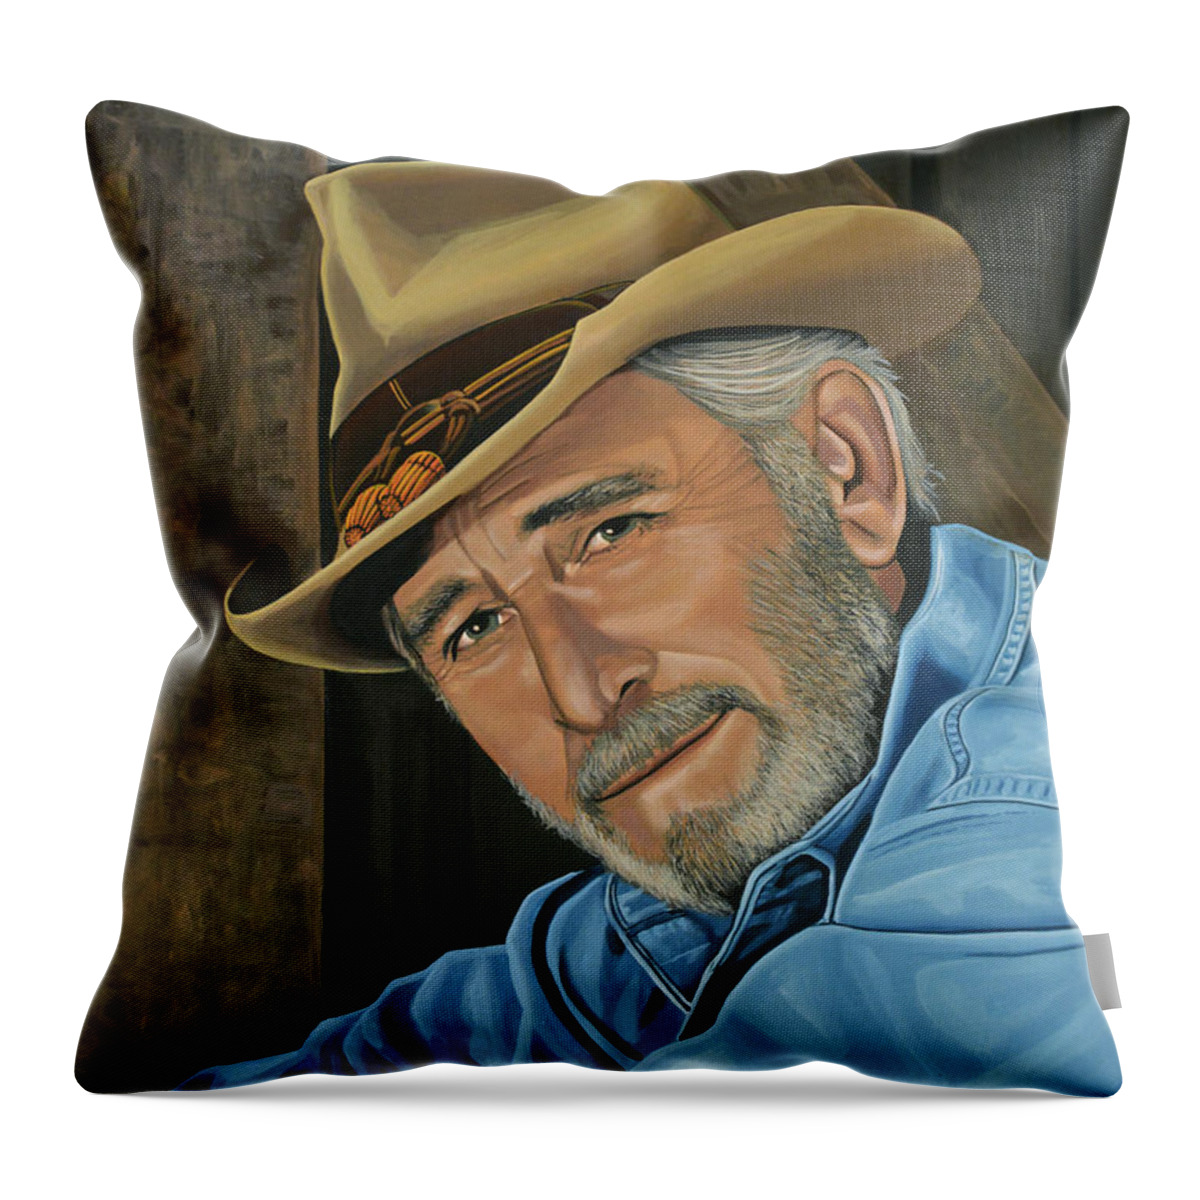 Don Williams Throw Pillow featuring the painting Don Williams Painting by Paul Meijering